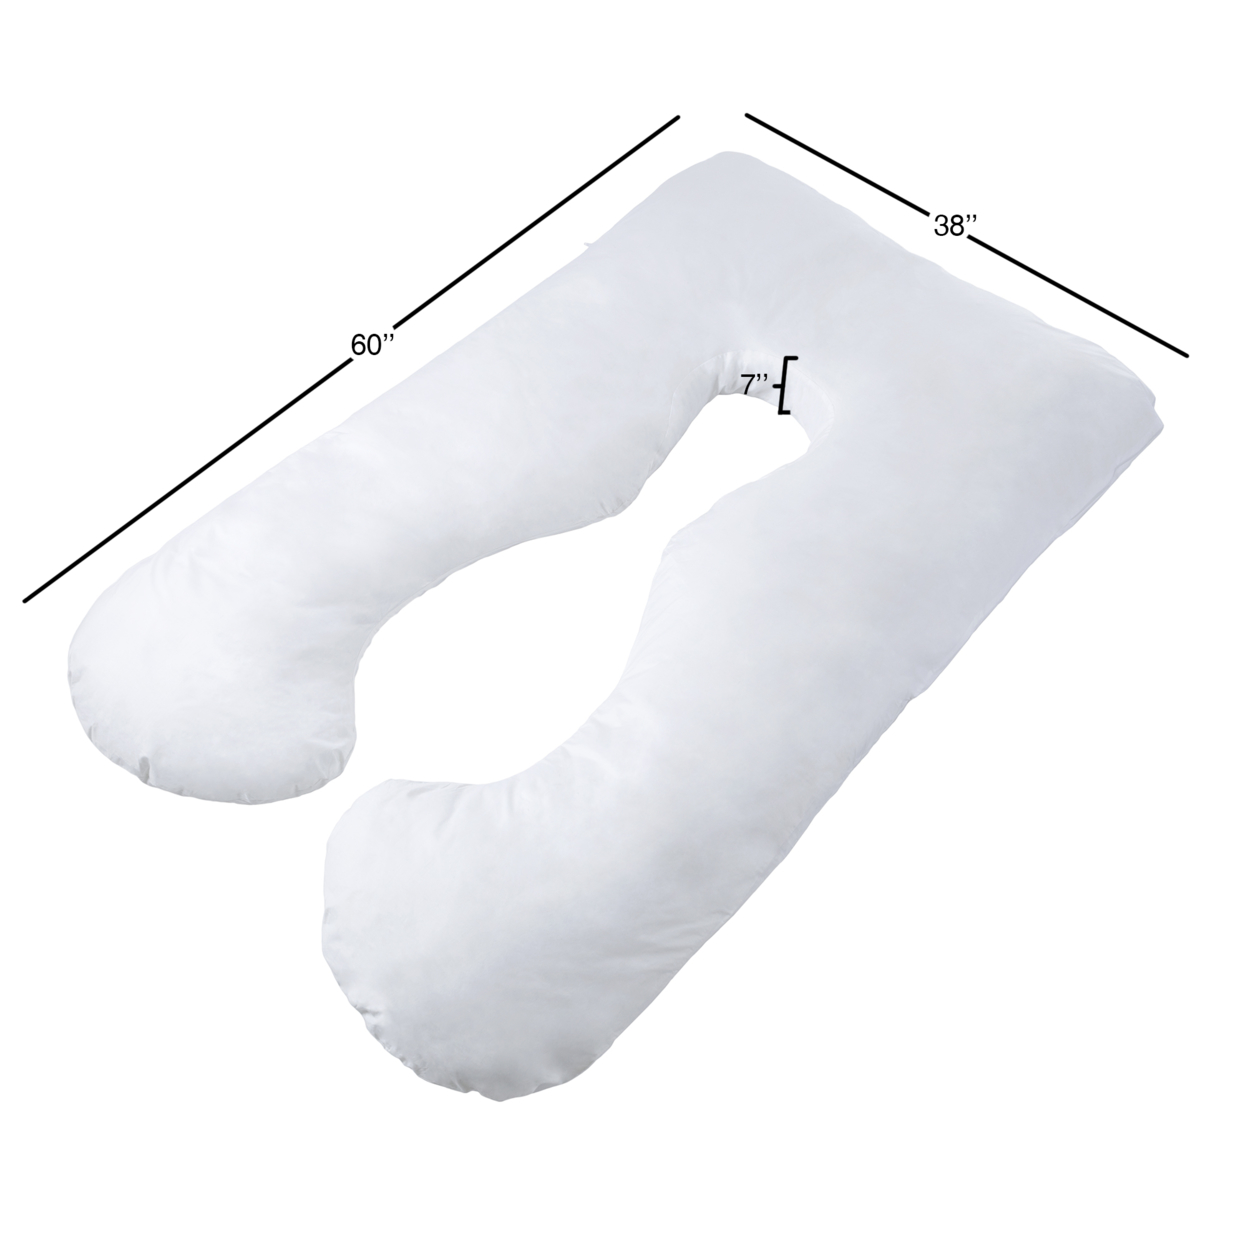 Full Body Pillow- 7 In 1 Jumbo Pillow With Removable Washable Cover, Comfortable U-Shape Pregnancy Pillow